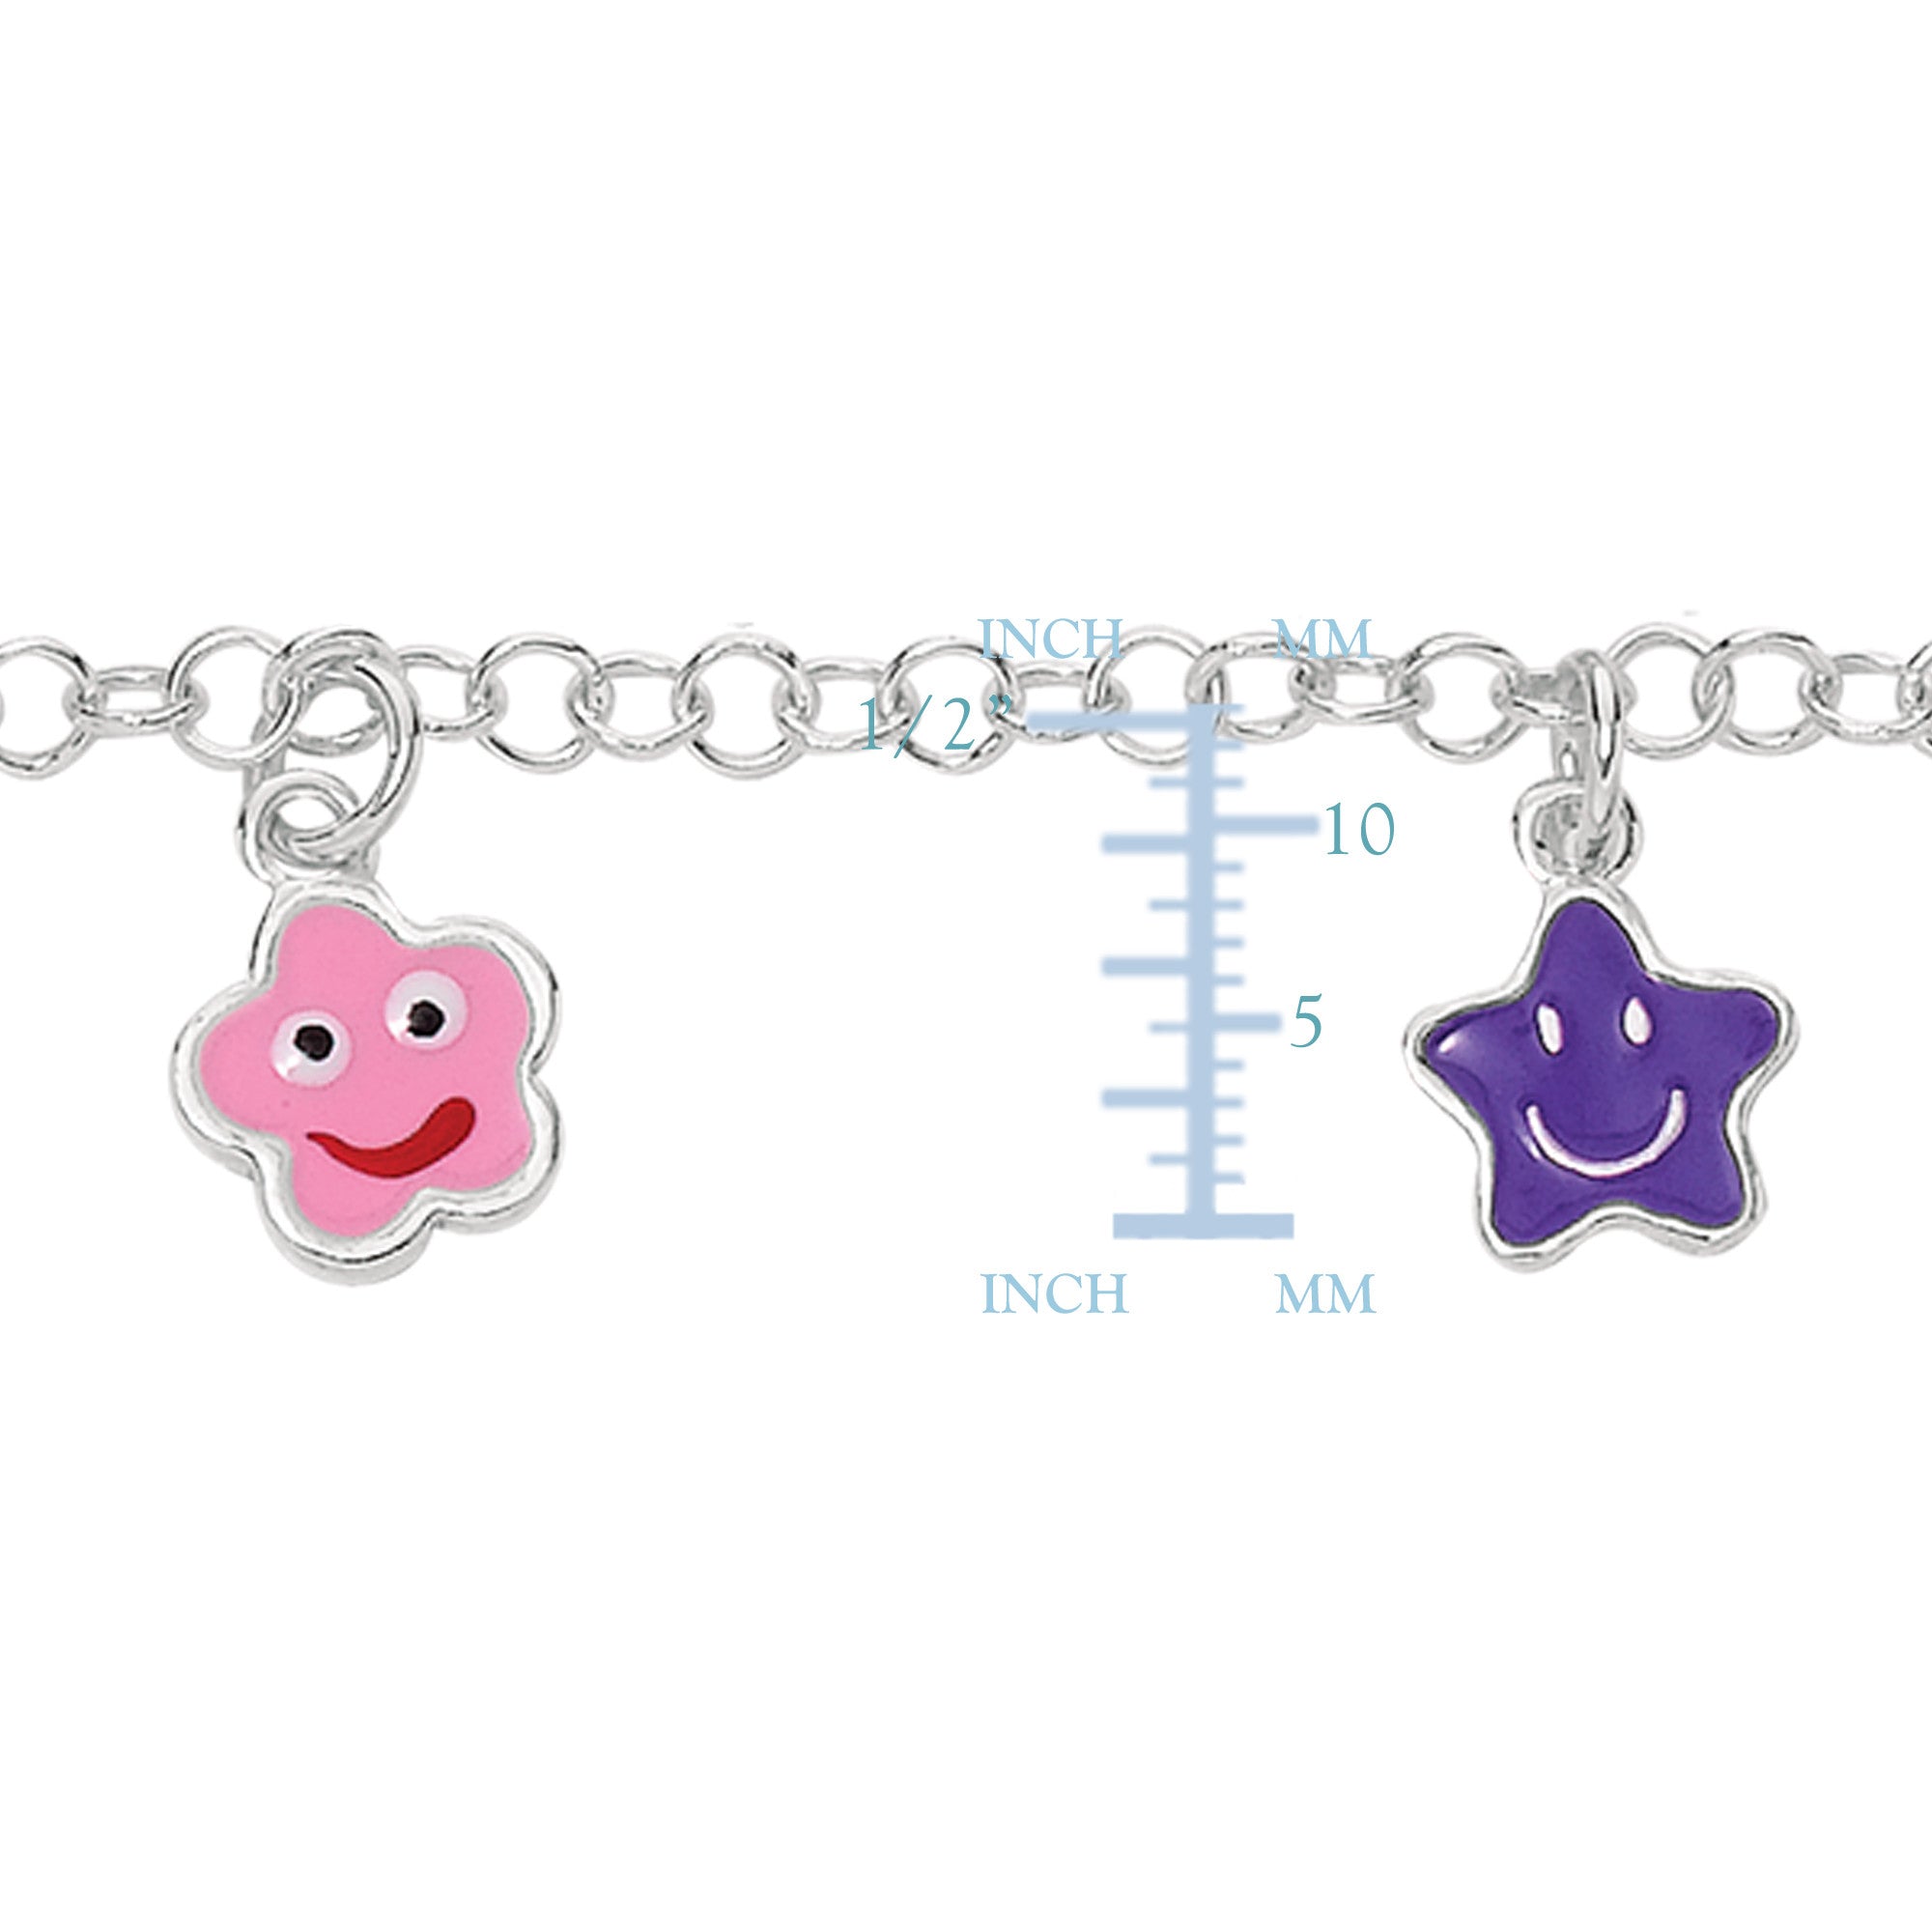 Baby Bracelet With Colorful Dangling Star Charms In Sterling Silver - 6 Inches - JewelryAffairs
 - 2